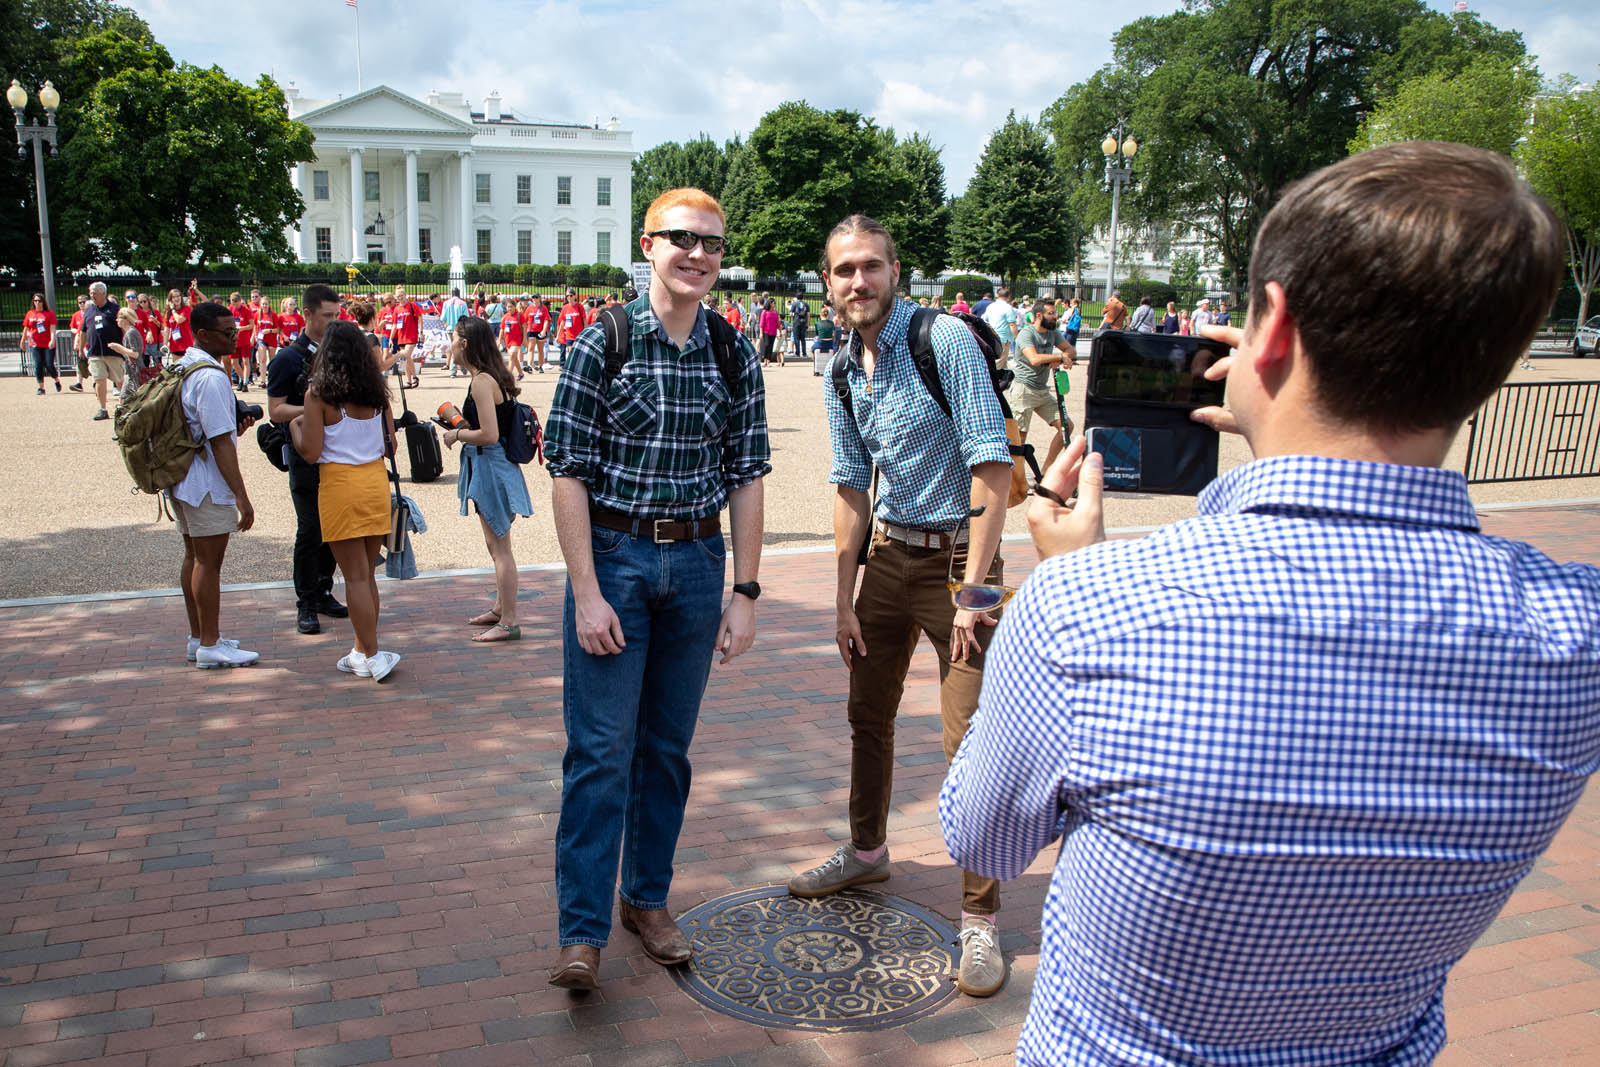 Instructor Corey Hutchins photographs Robert Schilling ’20 (left), and Max Chiaramonte ’20 (right), during an Introduction to Journalism class visit to the White House in Washington, DC, June 20, 2019. Photo by Lydia Thompson.